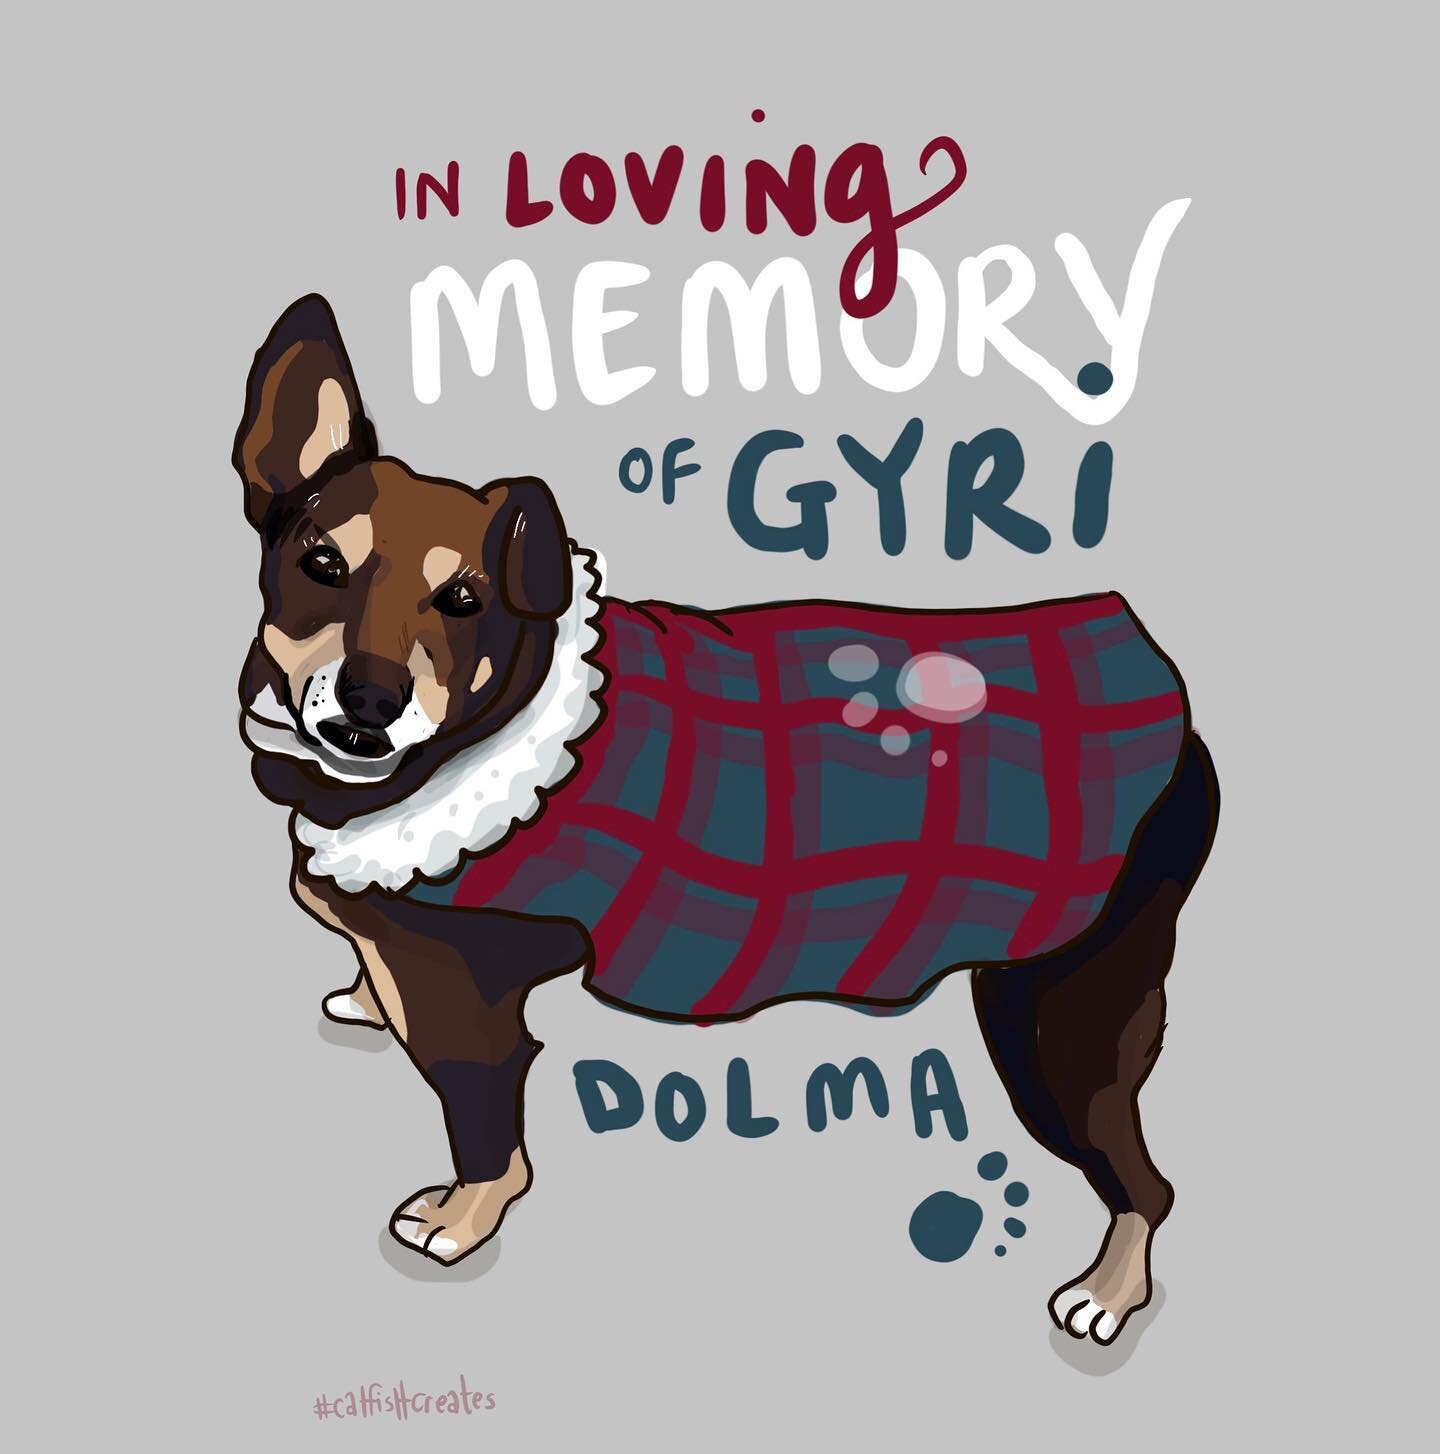 Meeting at the gompa this morning @drogmibuddhistinstitute to collectively whisper 49 prayers for a loving dog that reached 22 years in age - see you in the next life Gyri Dolma, the sweetest lady dawg! 🐾